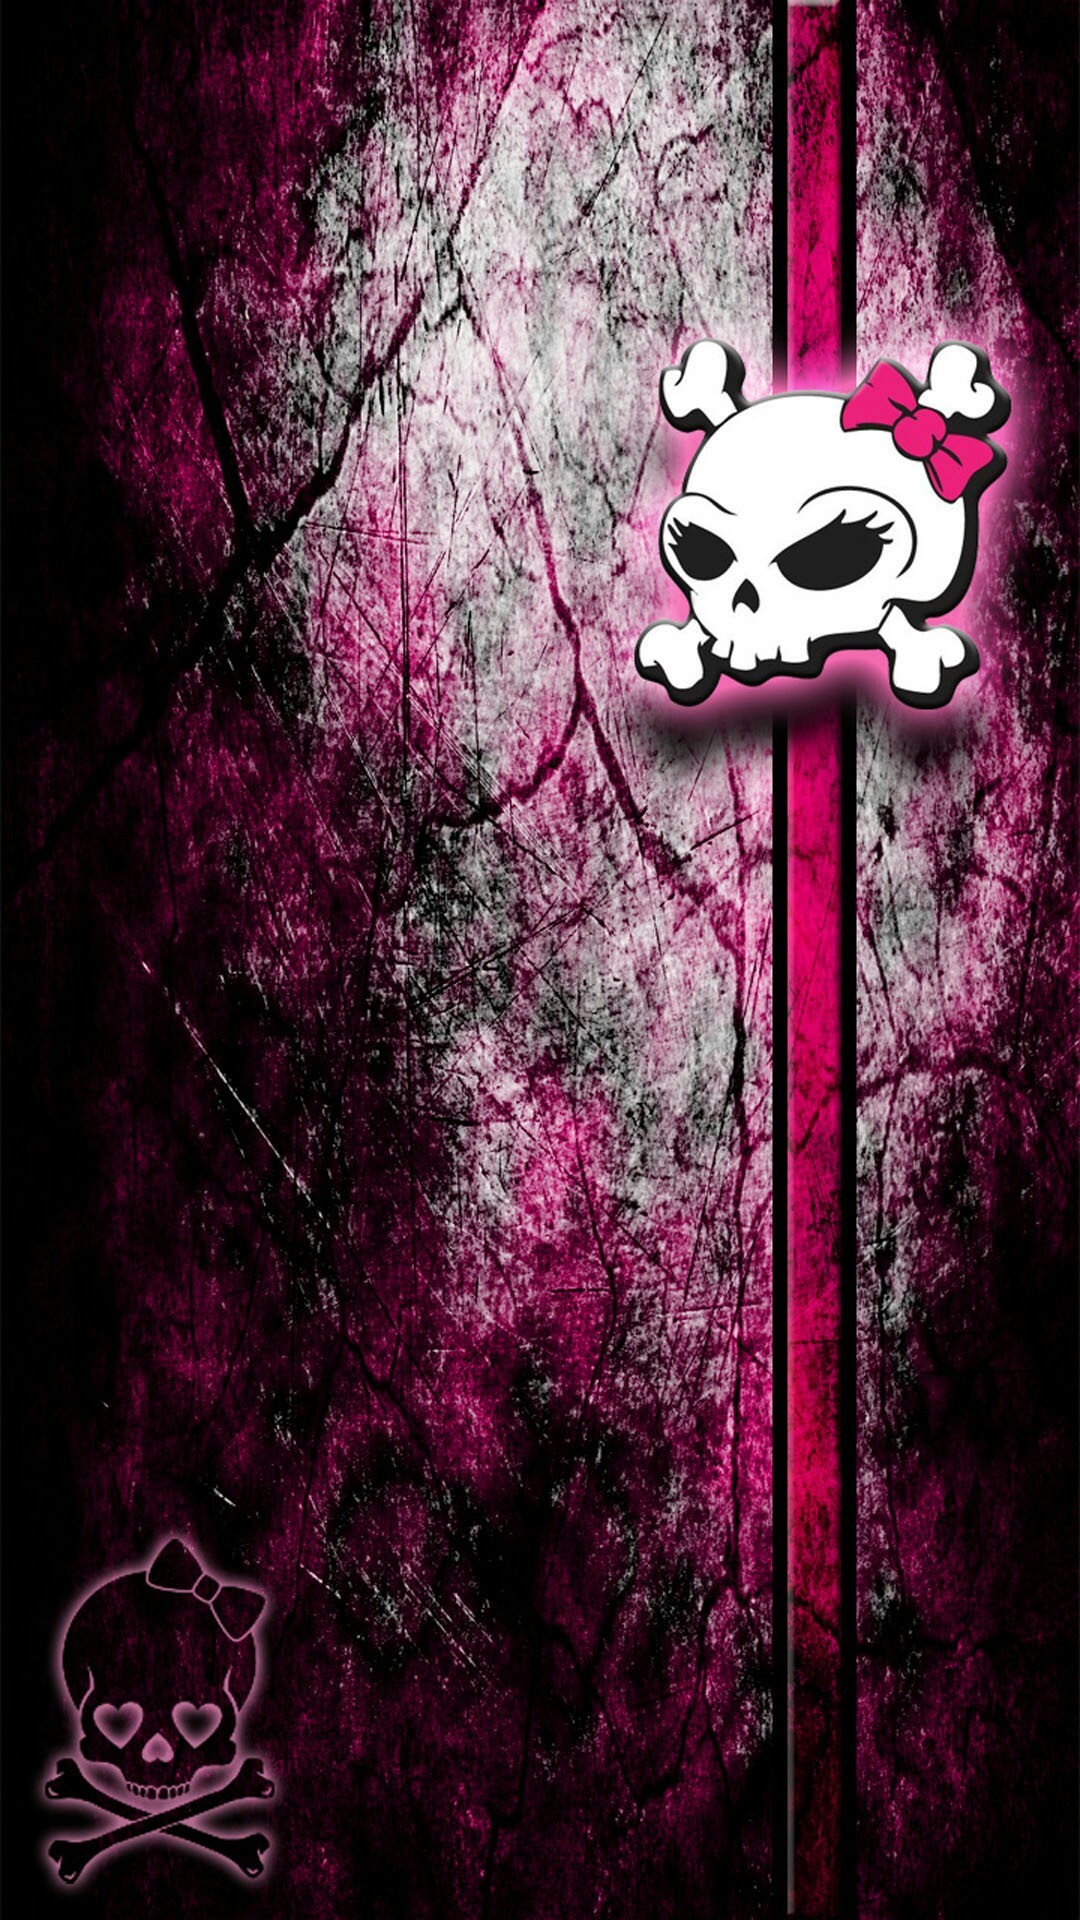 Iphone Wallpaper Skull Images  Free Photos PNG Stickers Wallpapers   Backgrounds  rawpixel